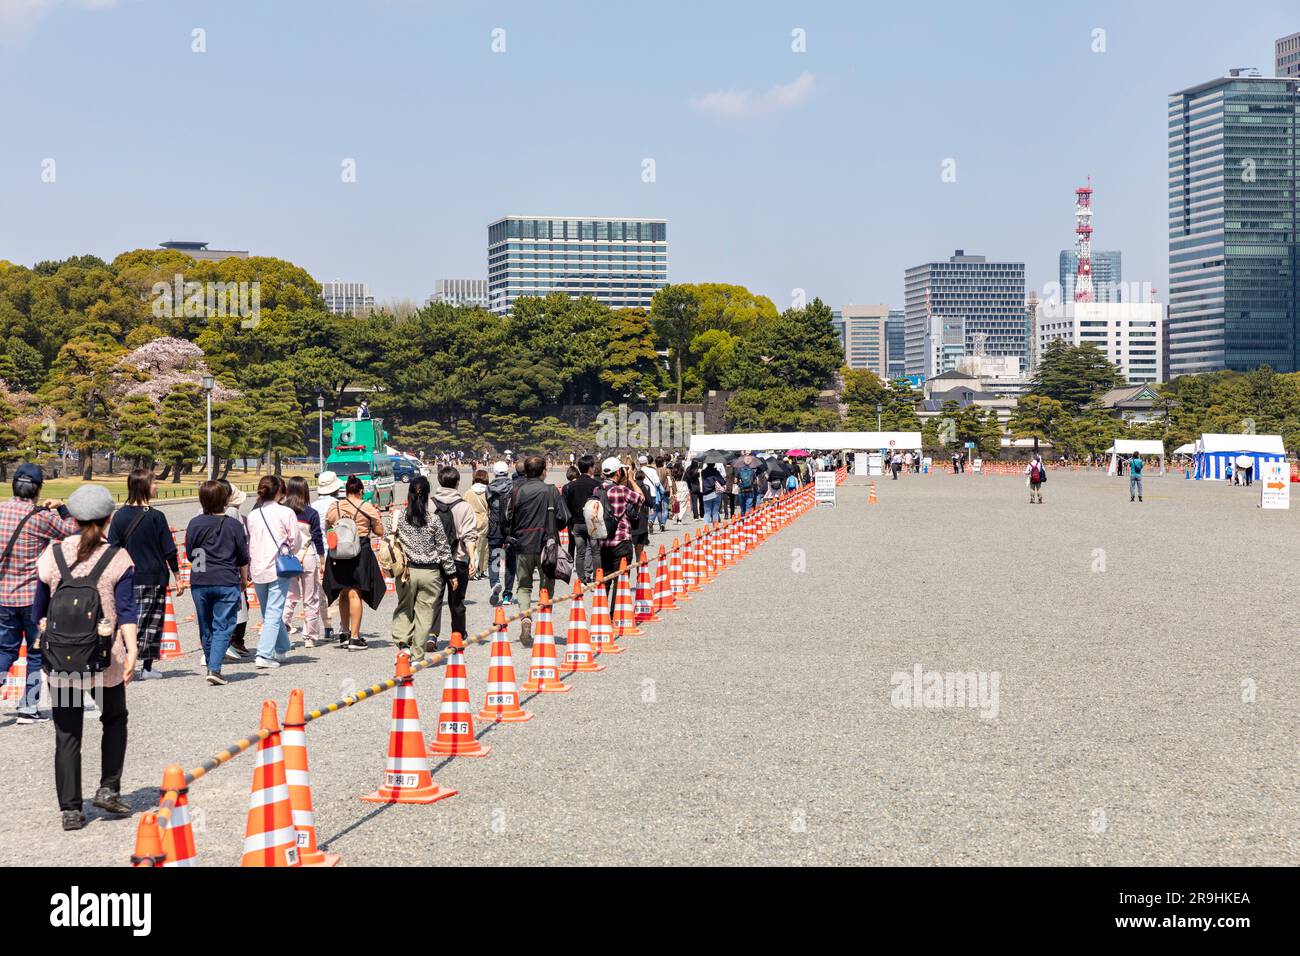 Tokyo Japan, 2023, people queue for security police check of bags to enter Imperial Palace gardens to view cherry blossom hanami,Japan,Asia Stock Photo